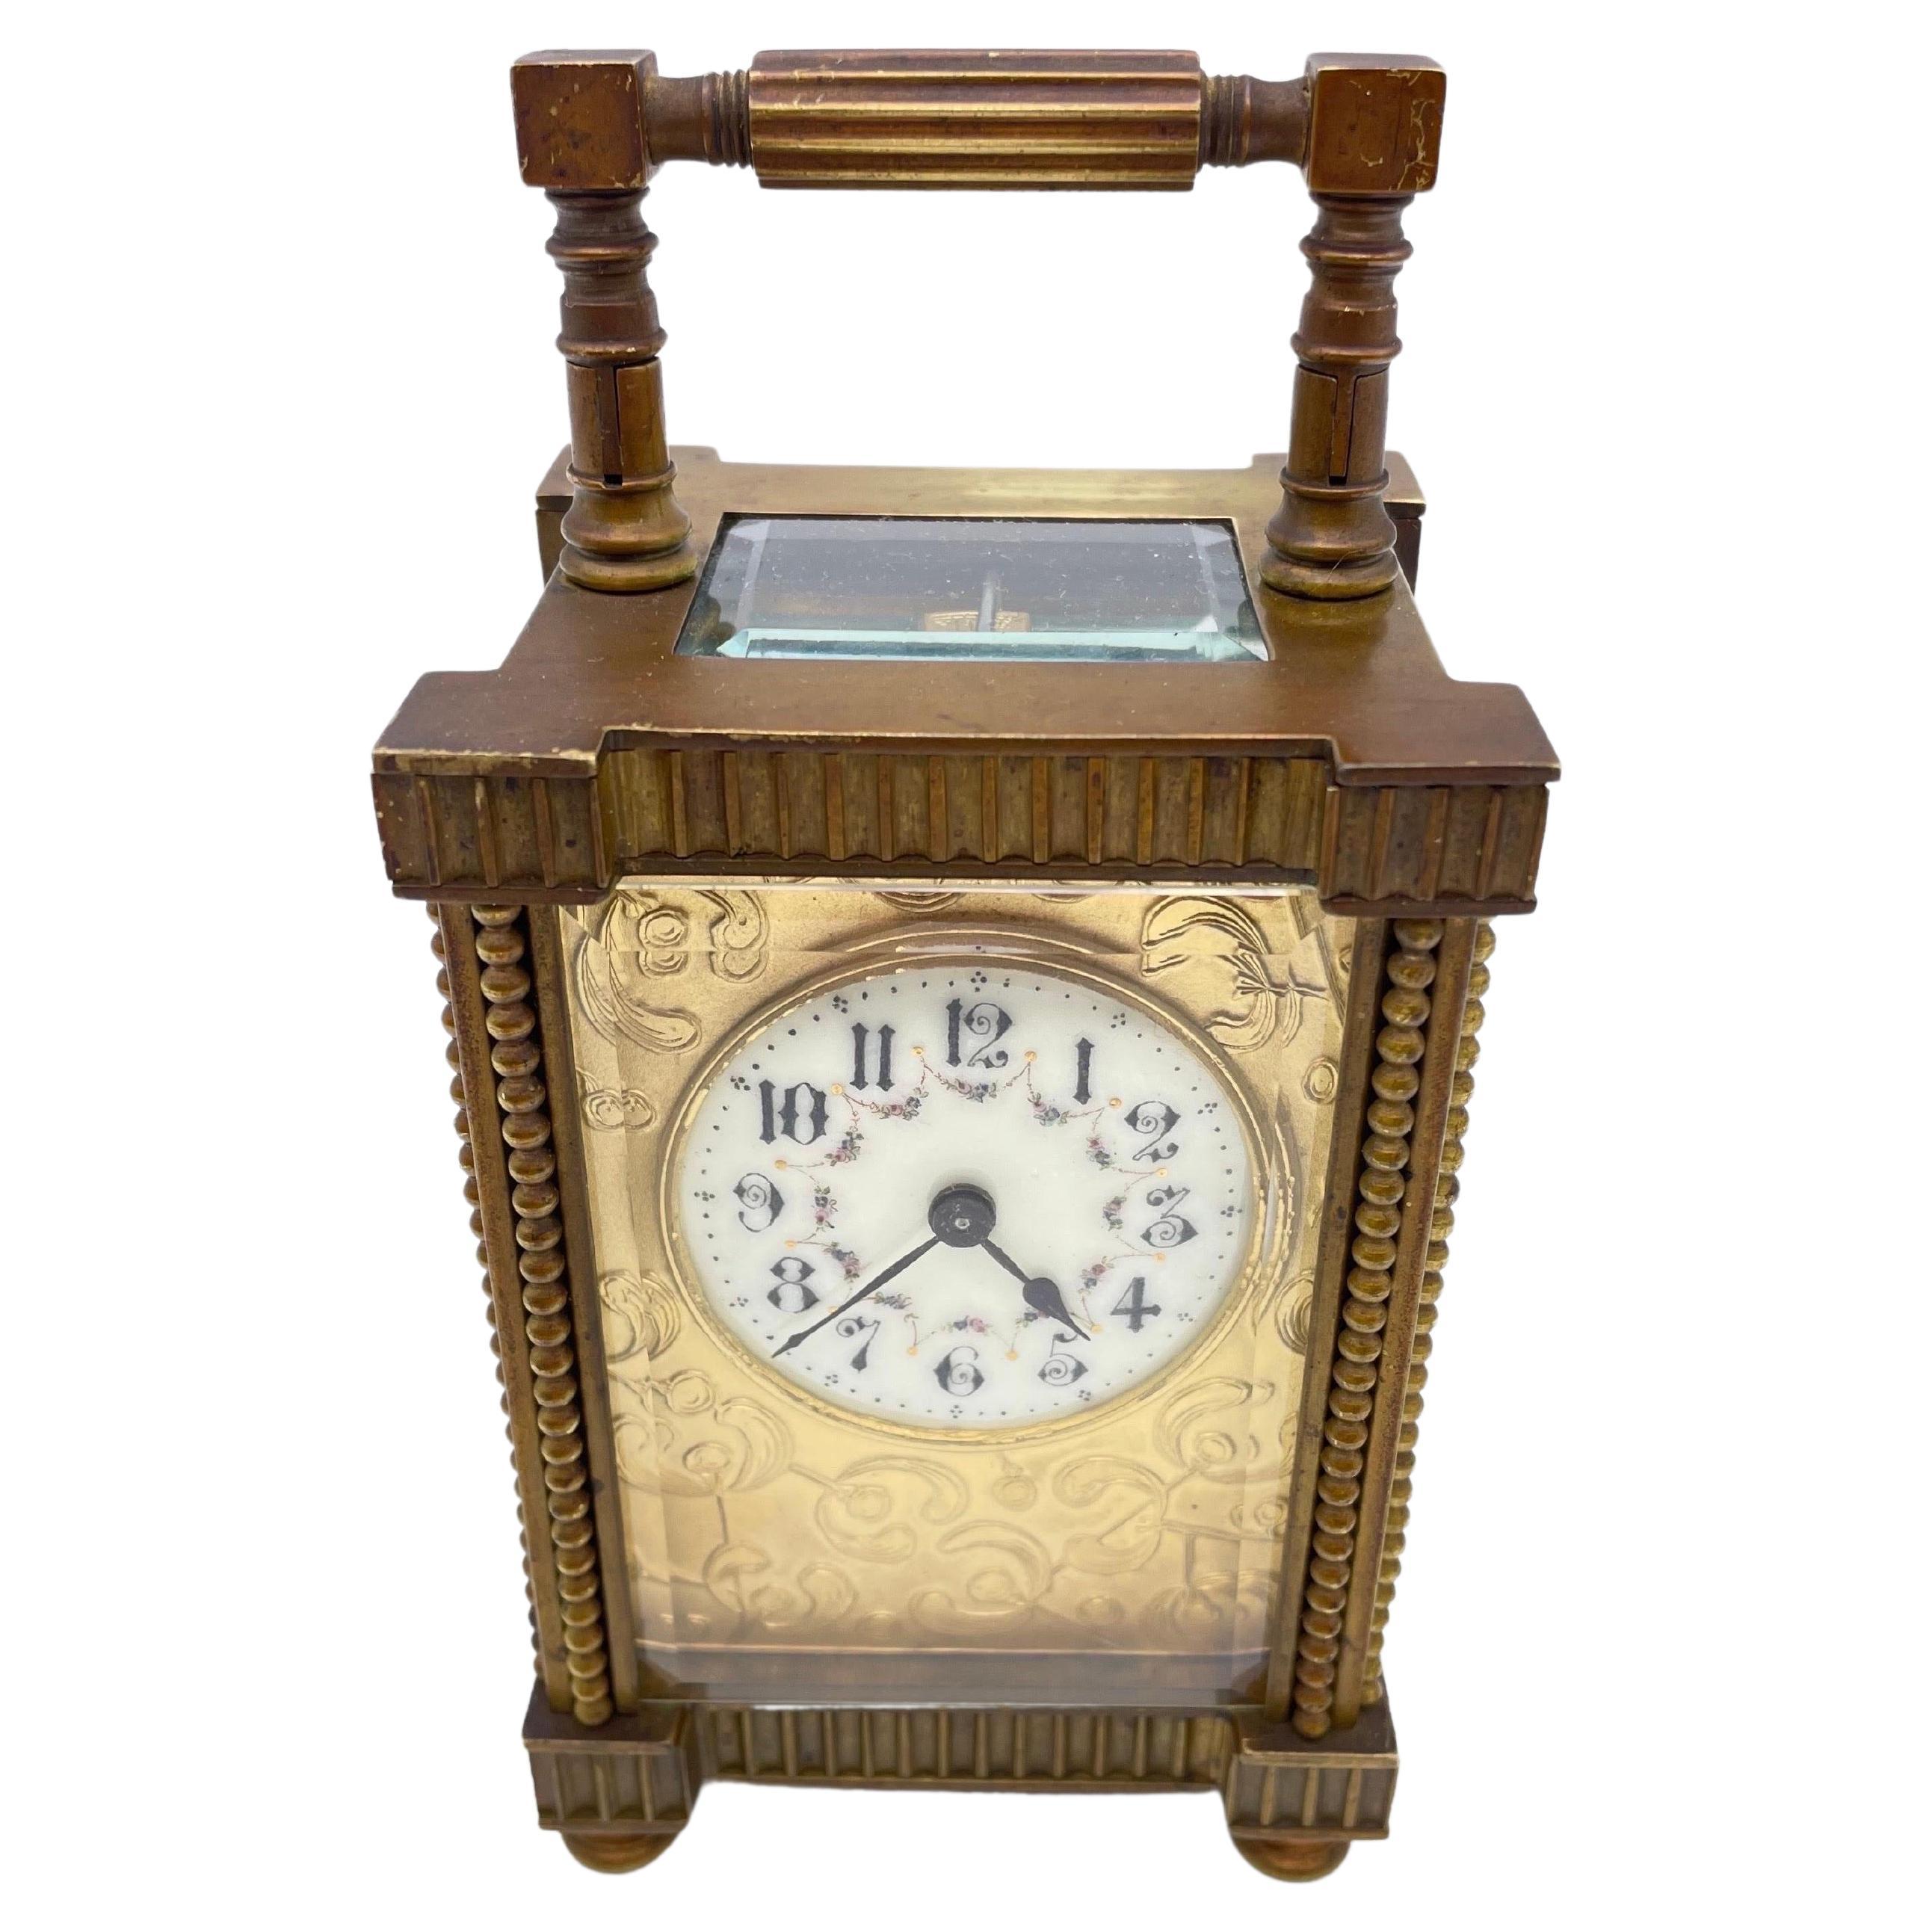 Travel alarm clock in a high-quality brass case
 With facet-cut enamelled glass and hand-painted dial  
the clockwork has to be taken over by the buyer himself and made to run